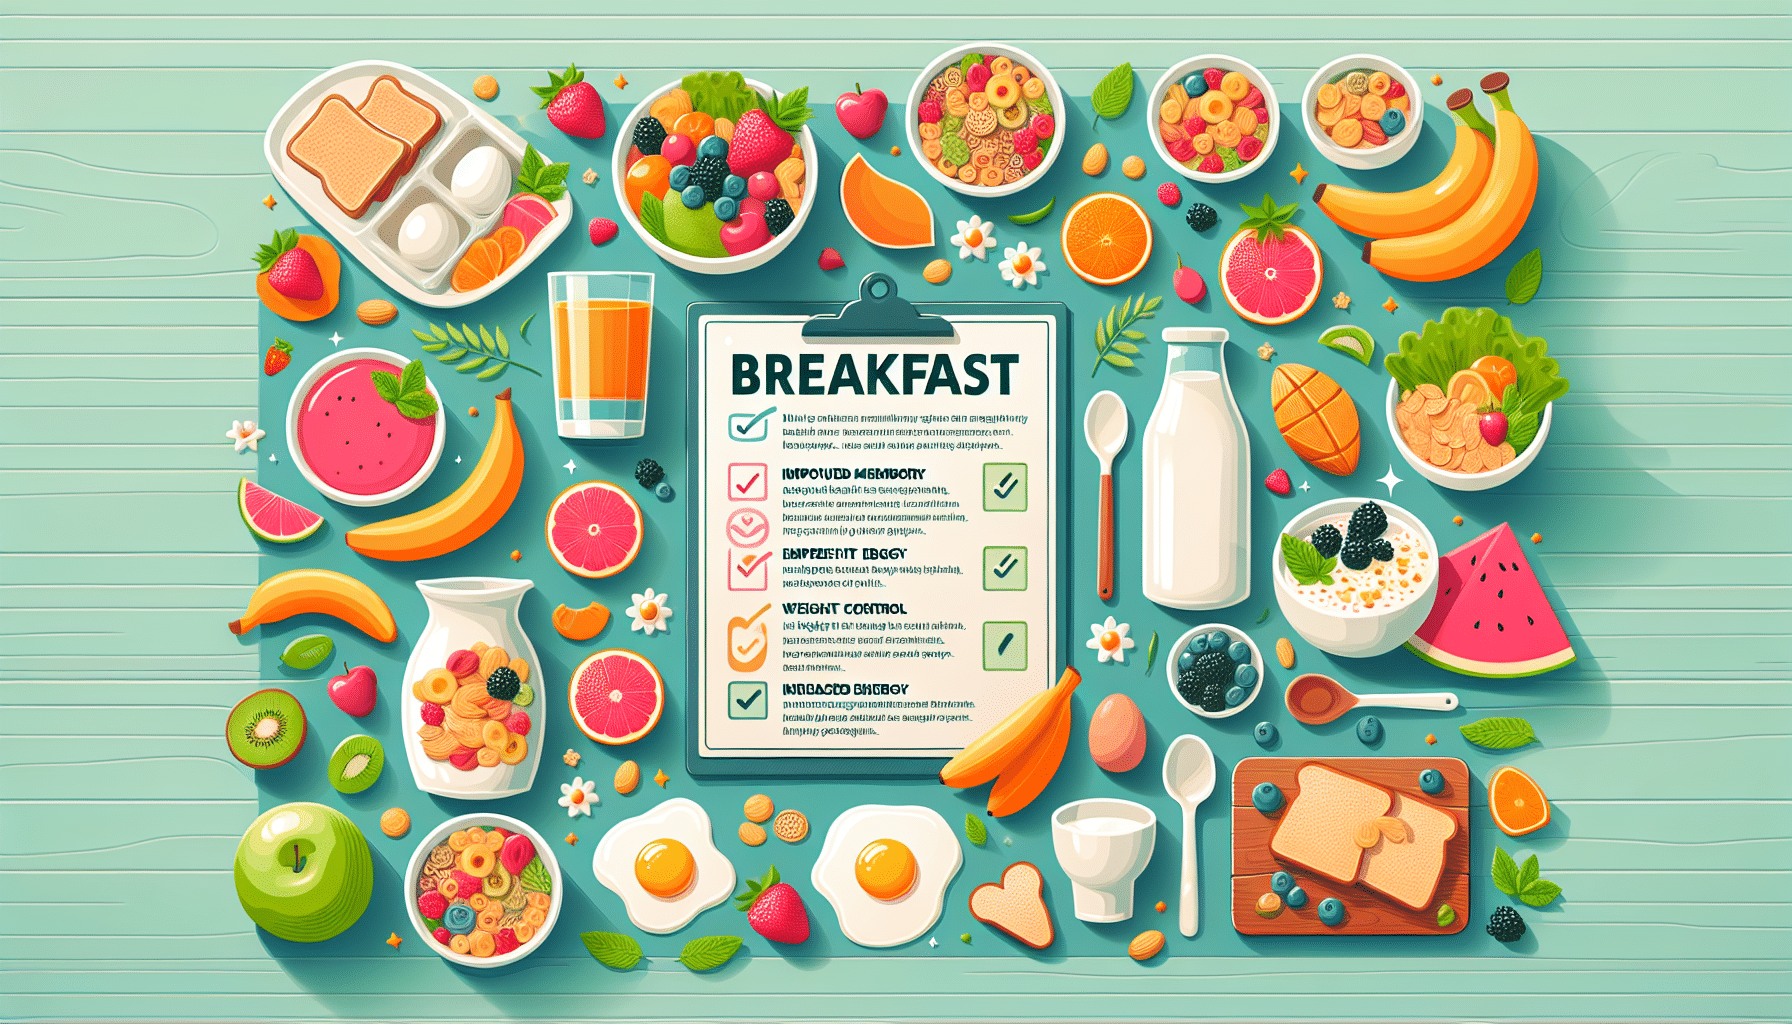 Breakfast: Fueling Your Day with Energy